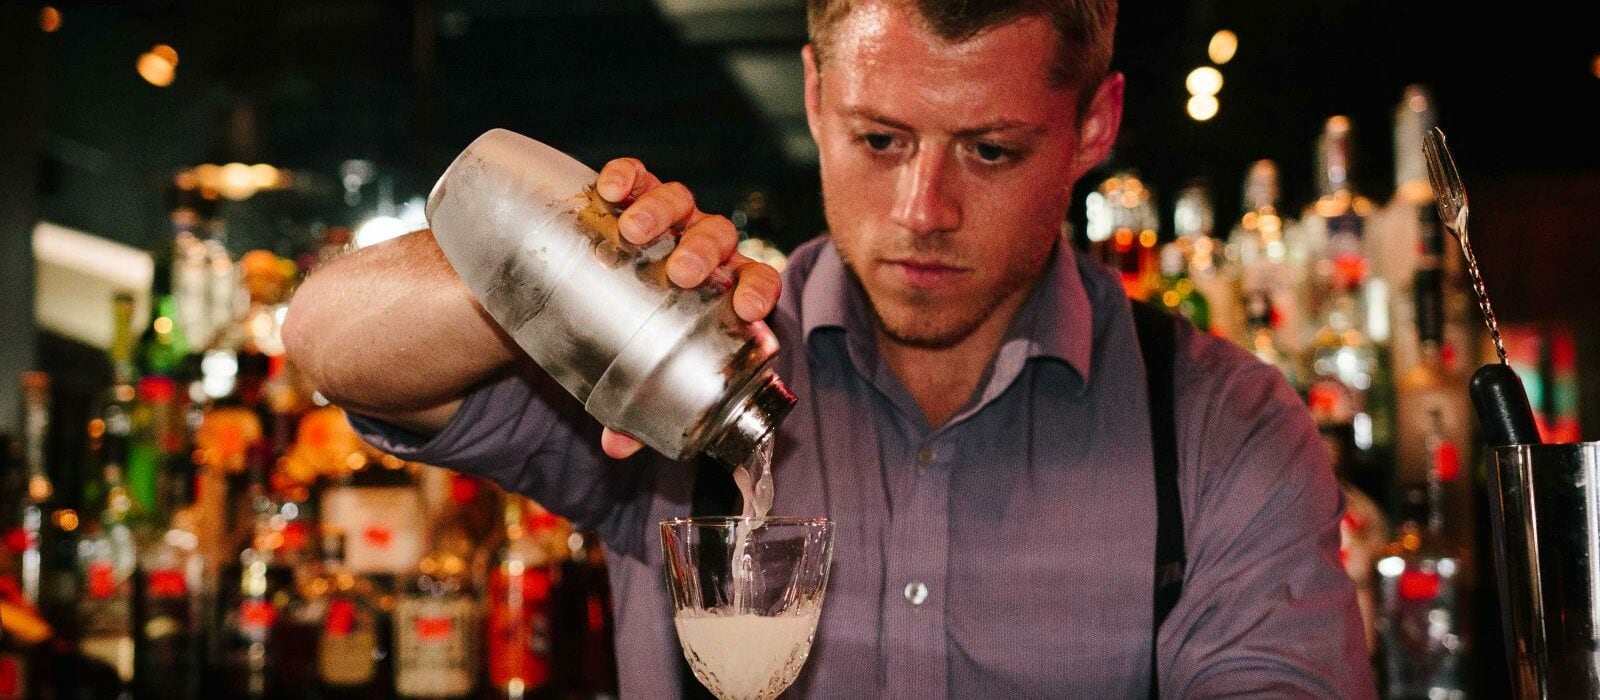 Traveling the World Bettered My Career: The Story of a Traveling Cocktail Bartender